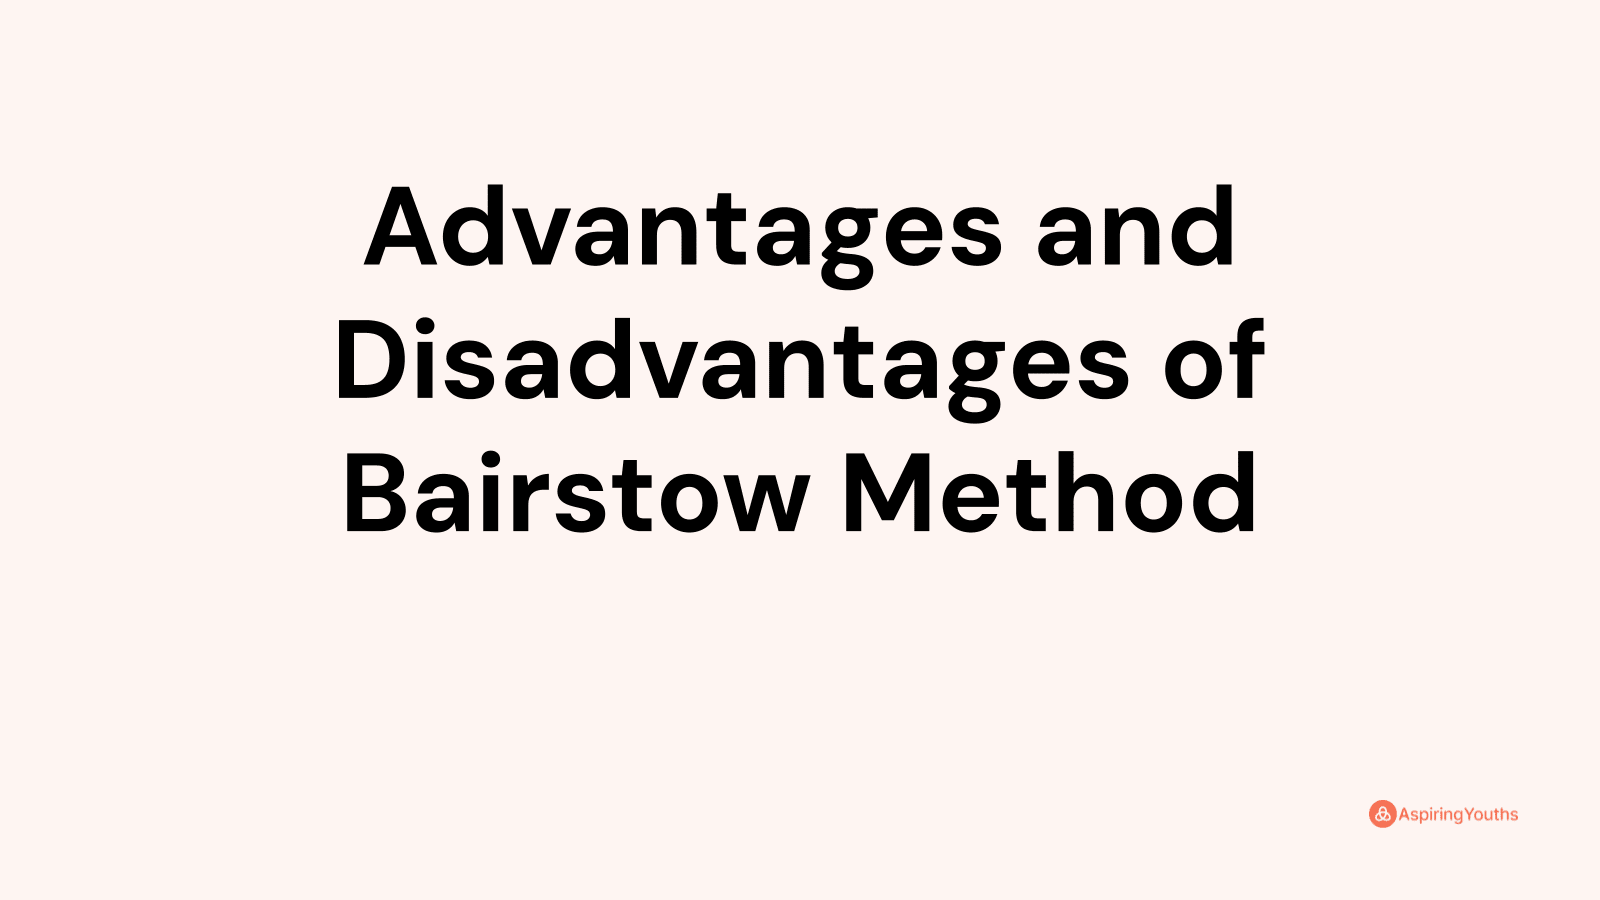 Advantages and disadvantages of Bairstow Method